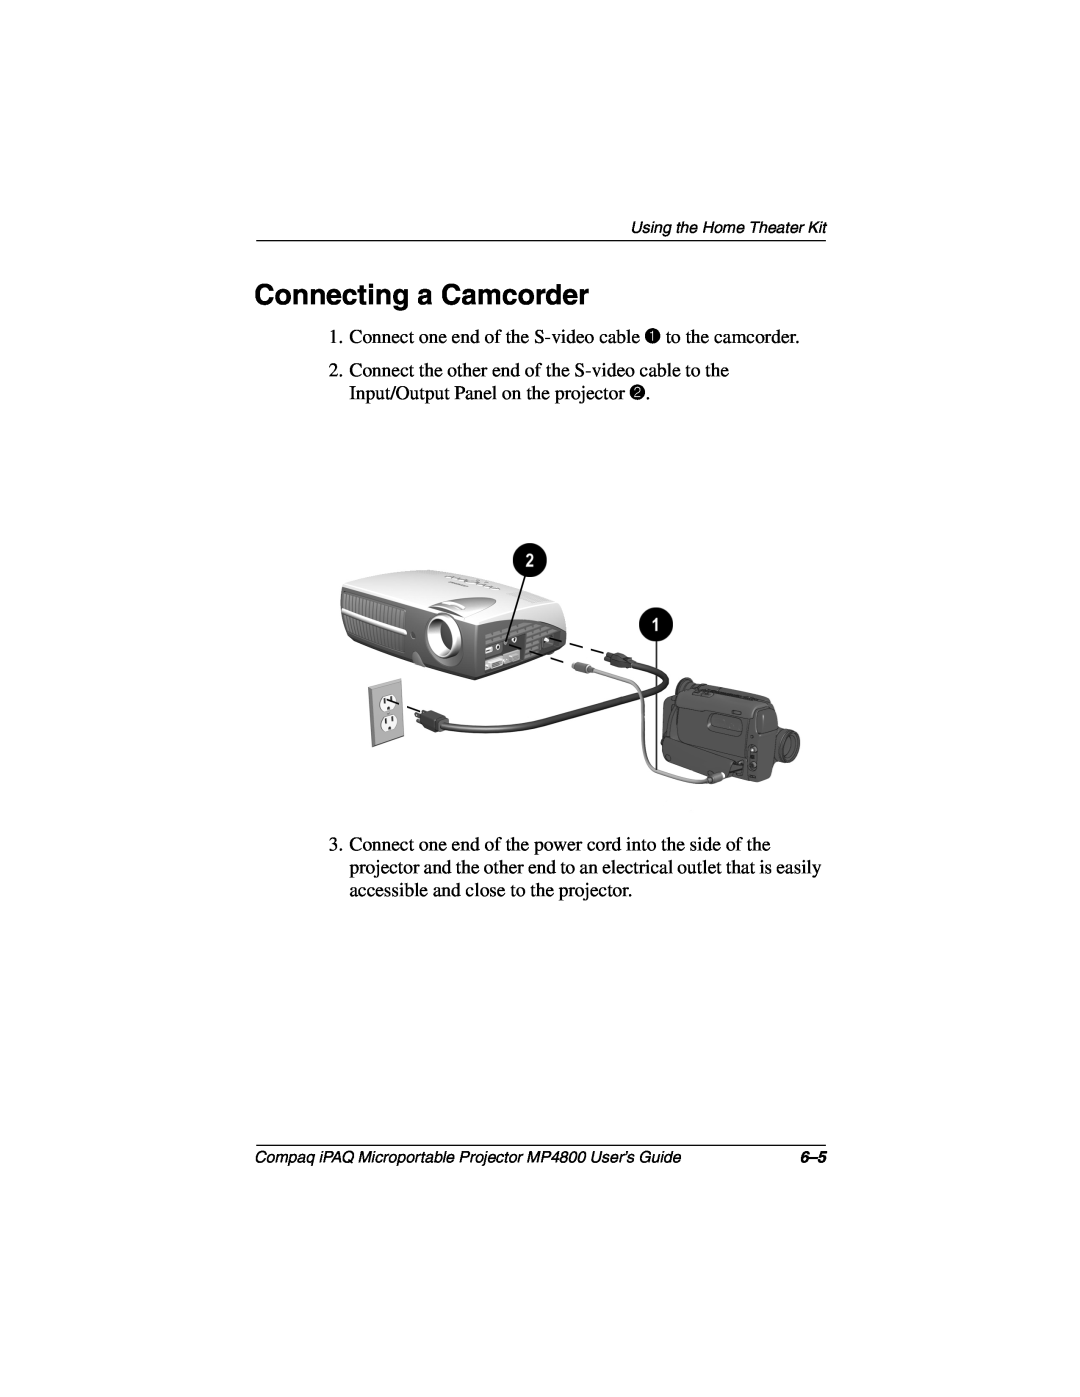 Compaq MP4800 manual Connecting a Camcorder 